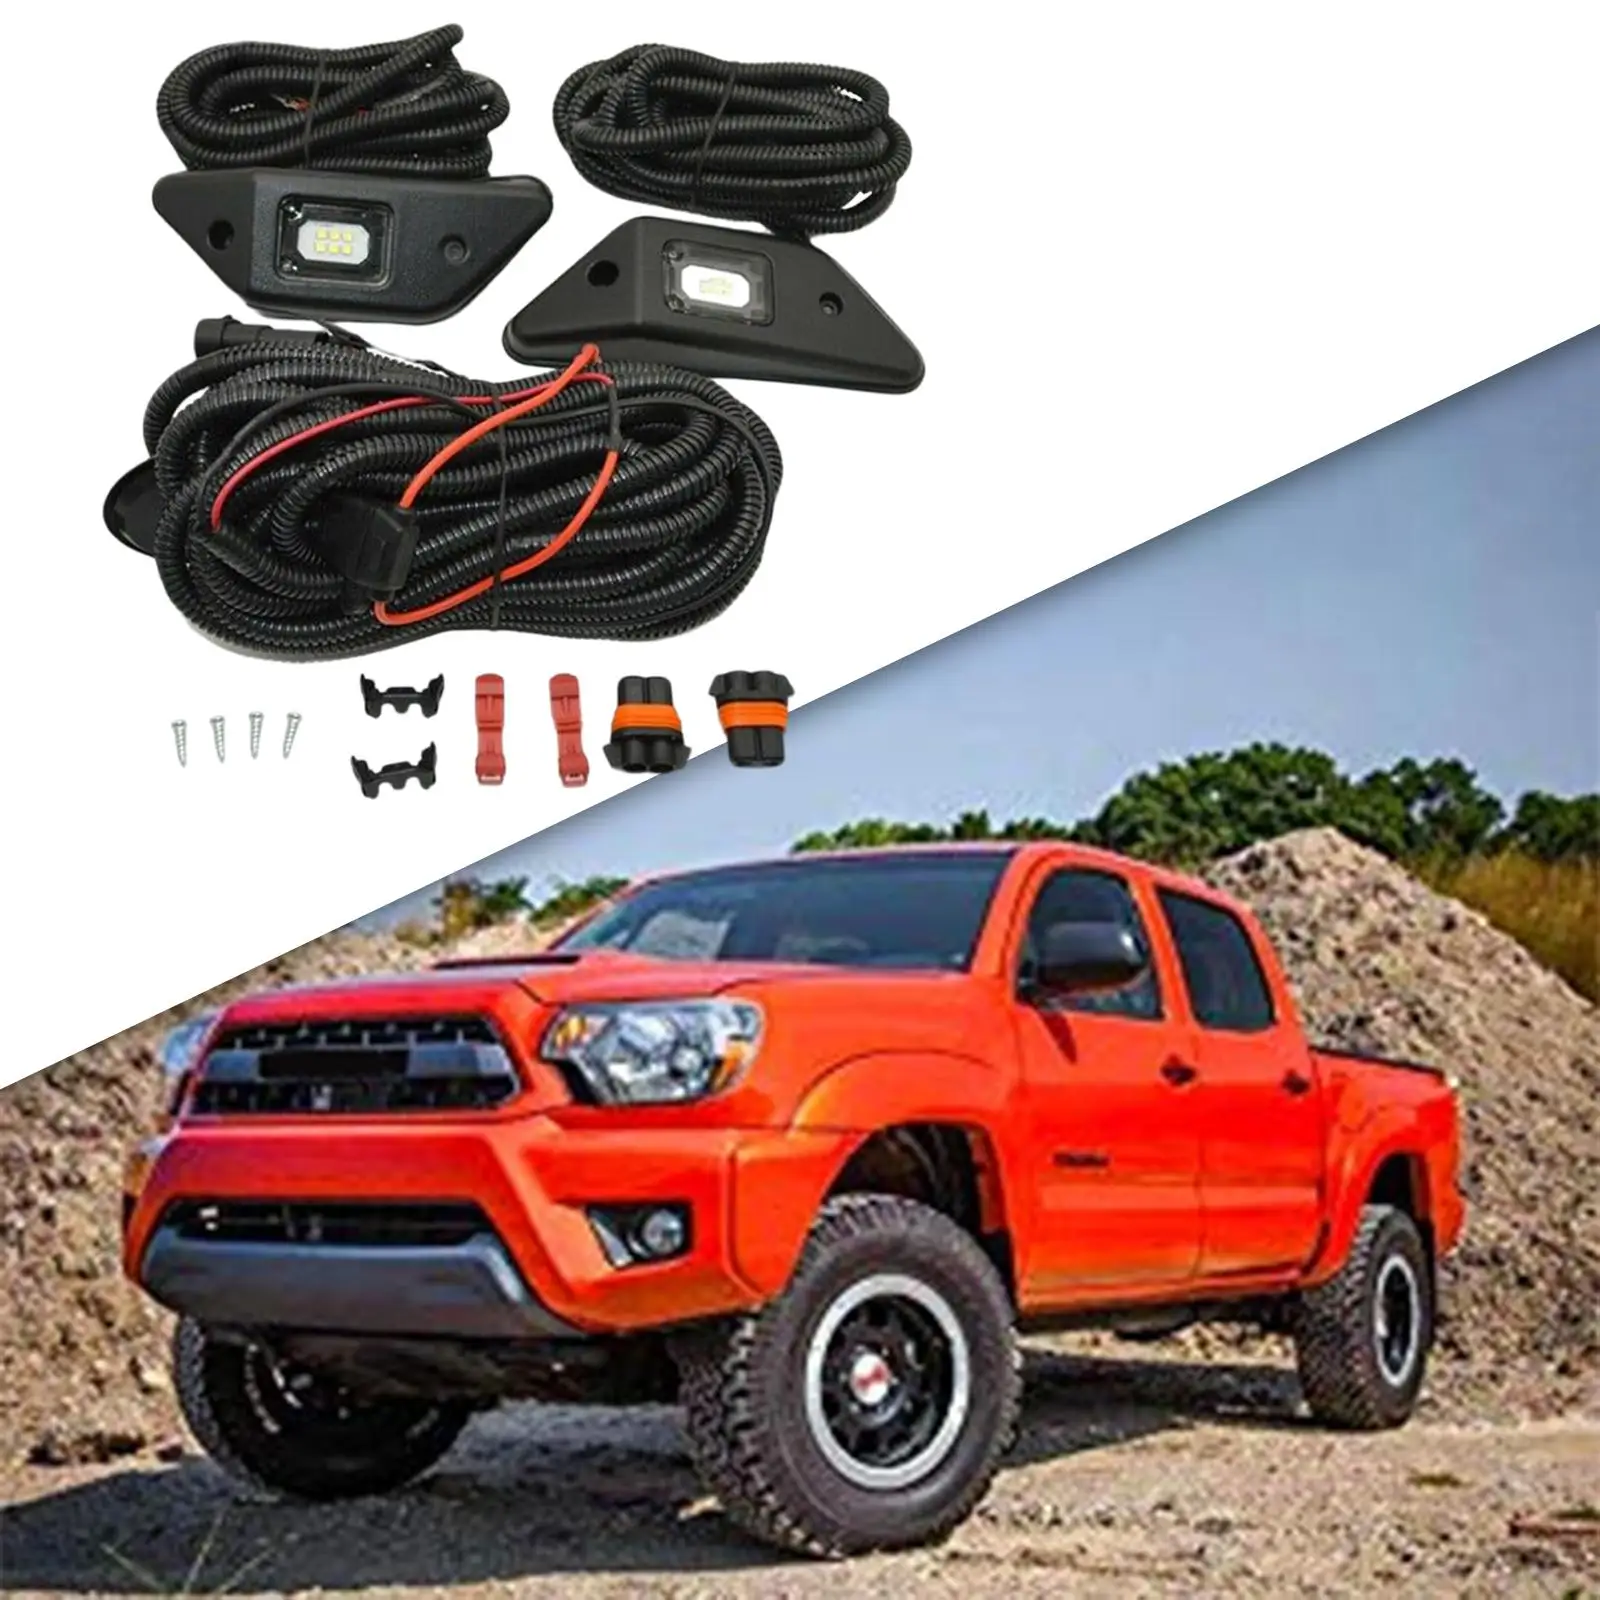 

Vehicle LED Cargo Bed Lighting Kit, Repair Part 00016-34187 0001634187 Wiring Harness Kit for Toyota for Tacoma for Tundra